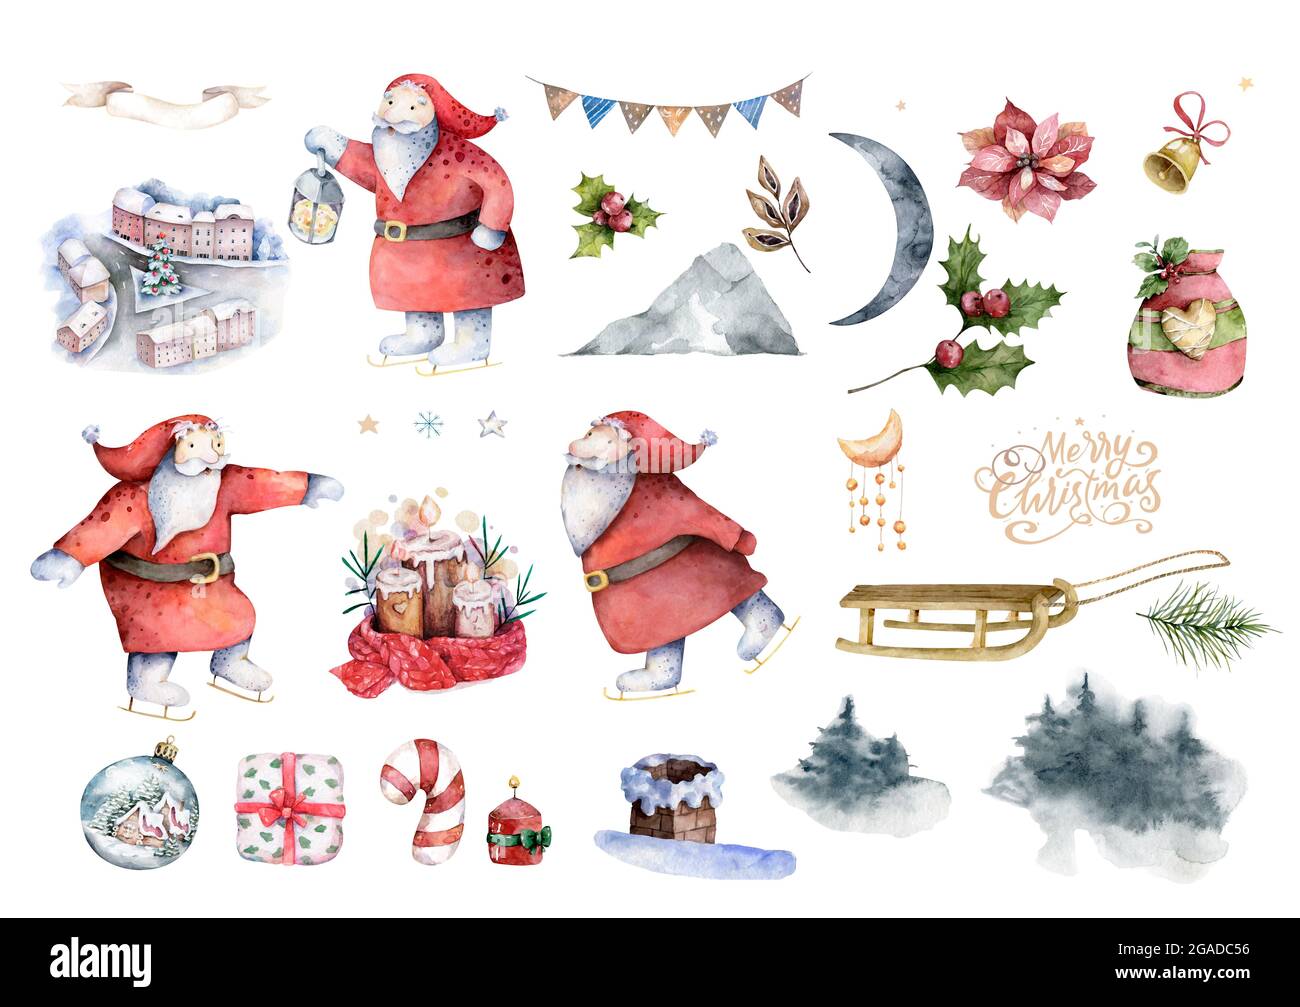 Santa Claus ride on reindeer, sleigh, run with bag, give gift box, fall  down the chimney, hold Christmas tree character design set. Watercolor  Stock Photo - Alamy